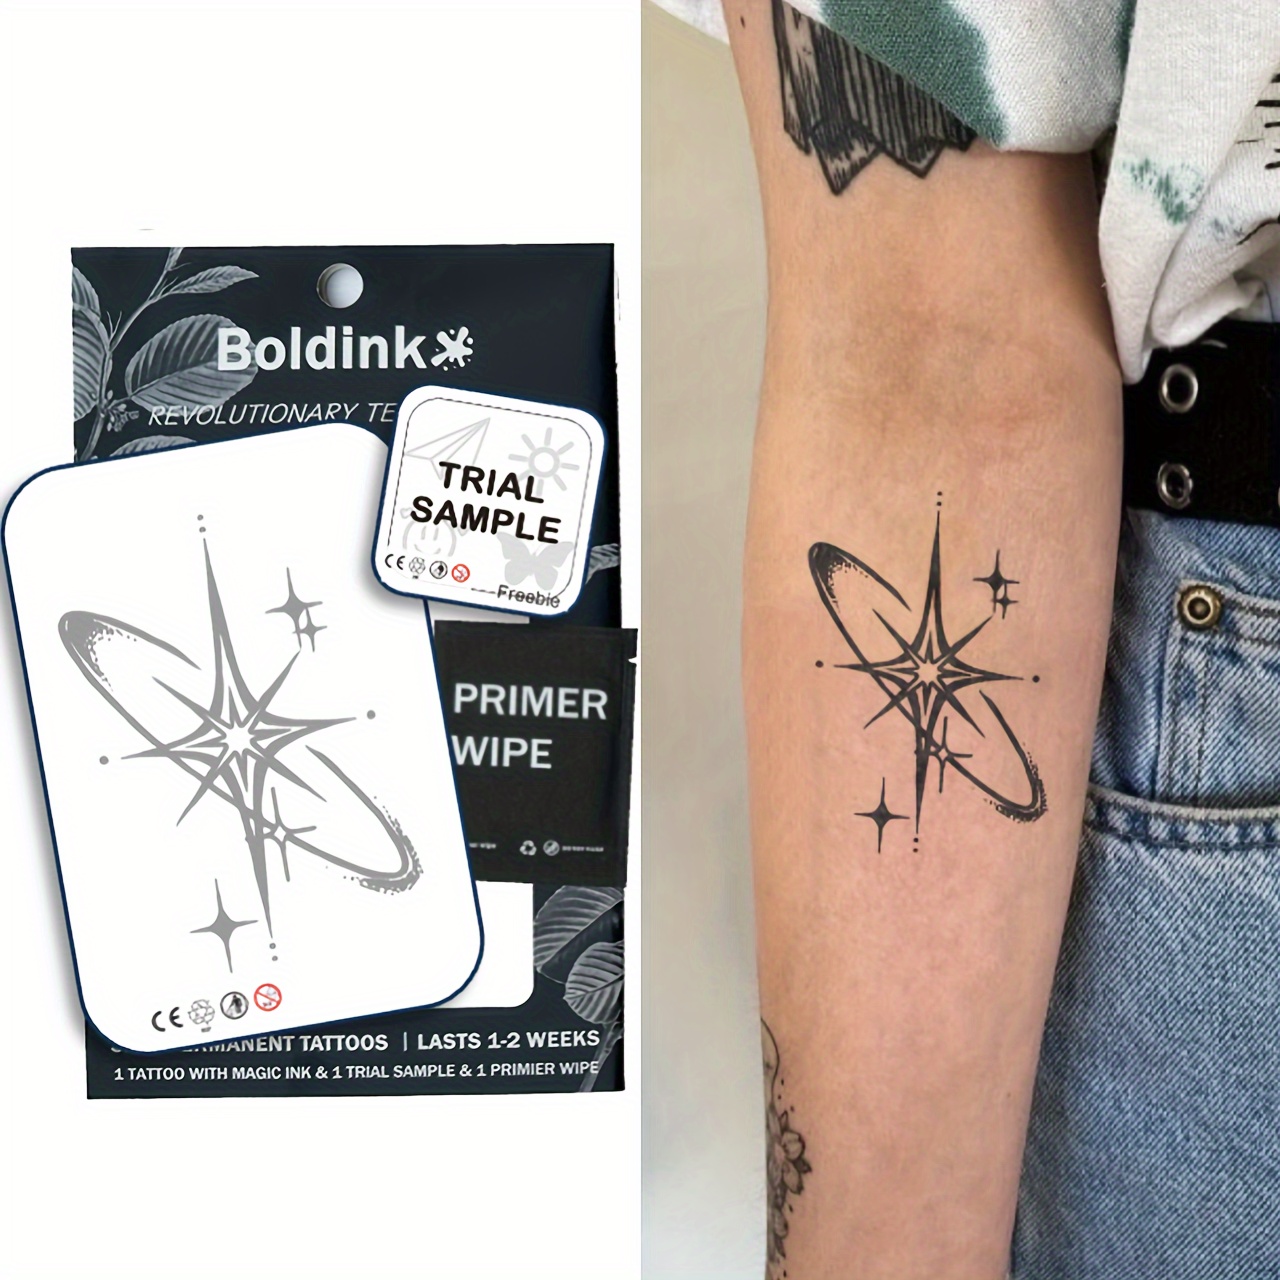 

Revolutionary Technology Tattoos, Semi-permanent Tattoos, Spark, Star, Temporary Tattoos, Fake Tattoos, Water-resistant, Authentic Tattoo Look, Plant-based, Tattoo, X114